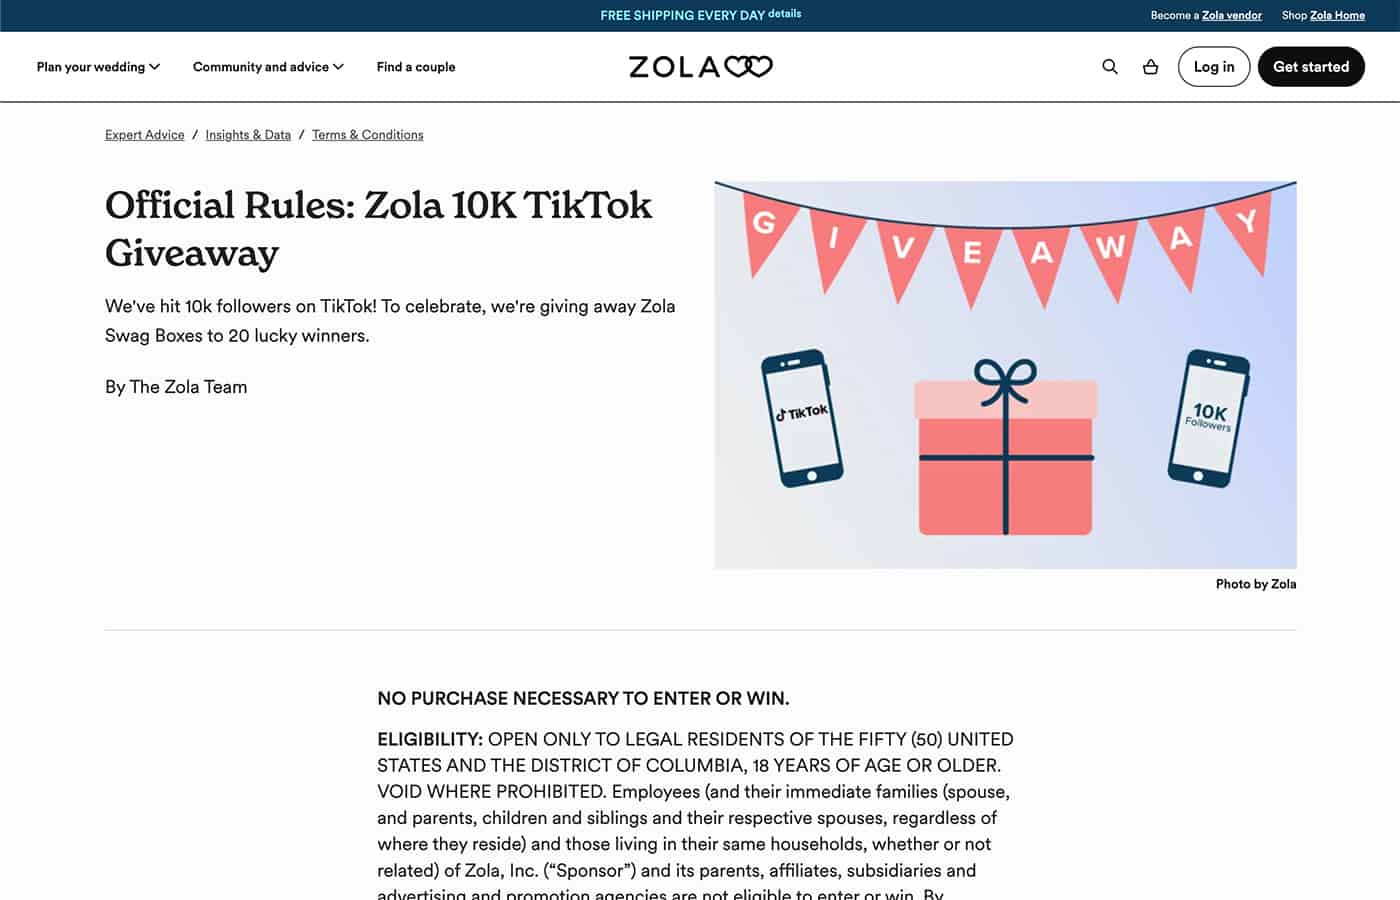 An image showing an example of Zola hosting a giveaway